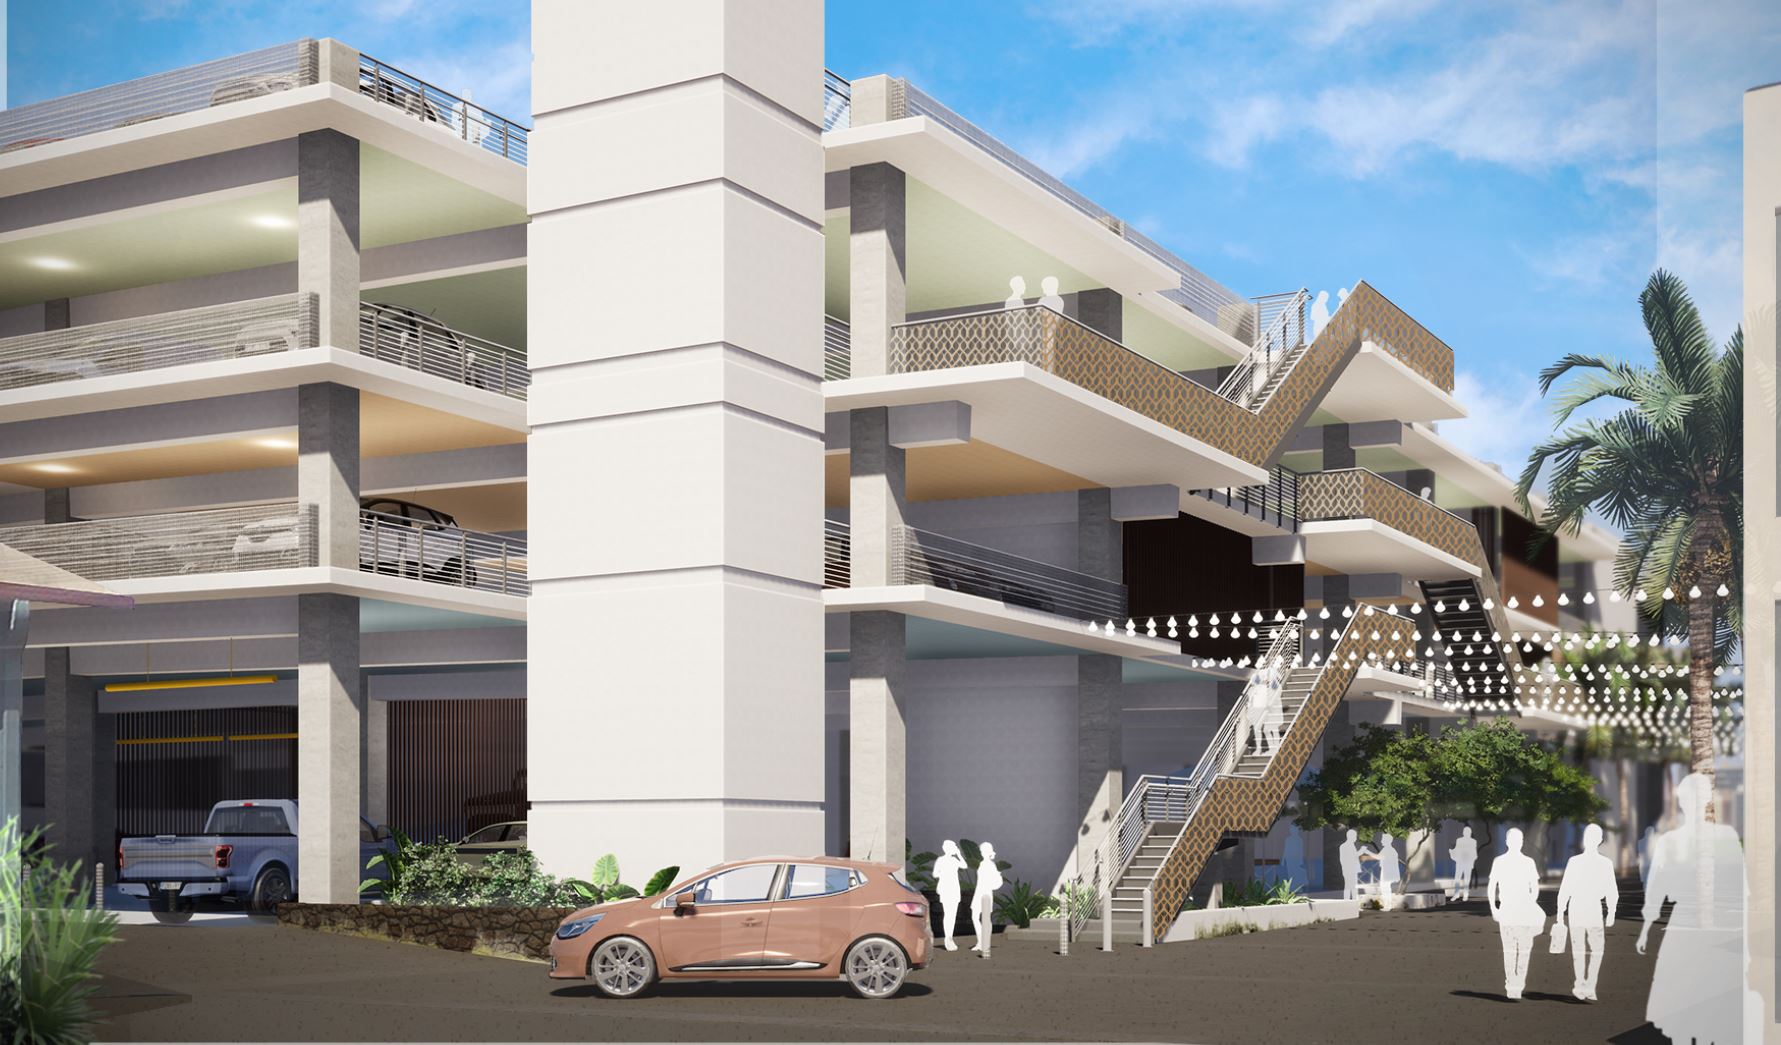 Phase 1A and 1B reder of the Wailuku Civic Center will buildout the infrastructure improvements (demolition, site improvements, and utility installation) and parking structure in central Wailuku.